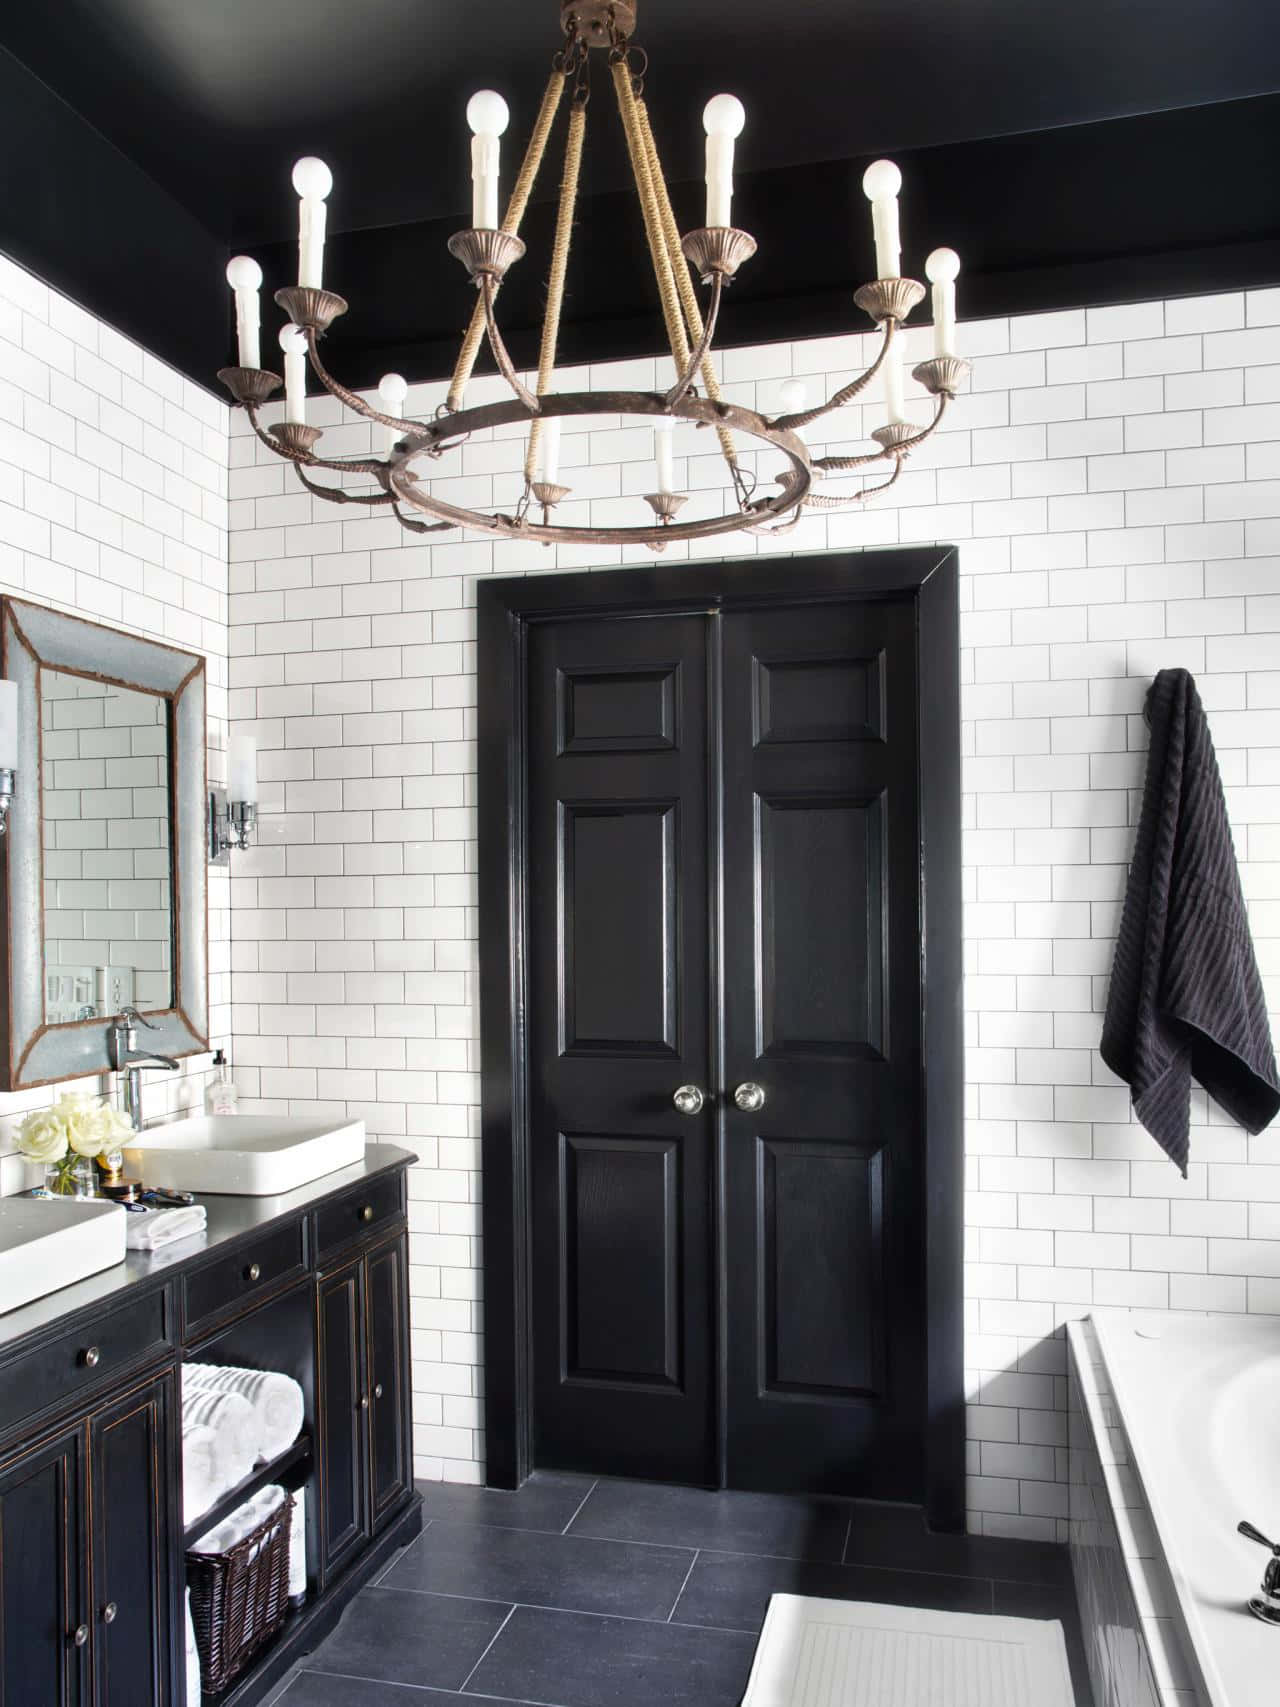 Contemporary black and white bathroom surrounded with natural light